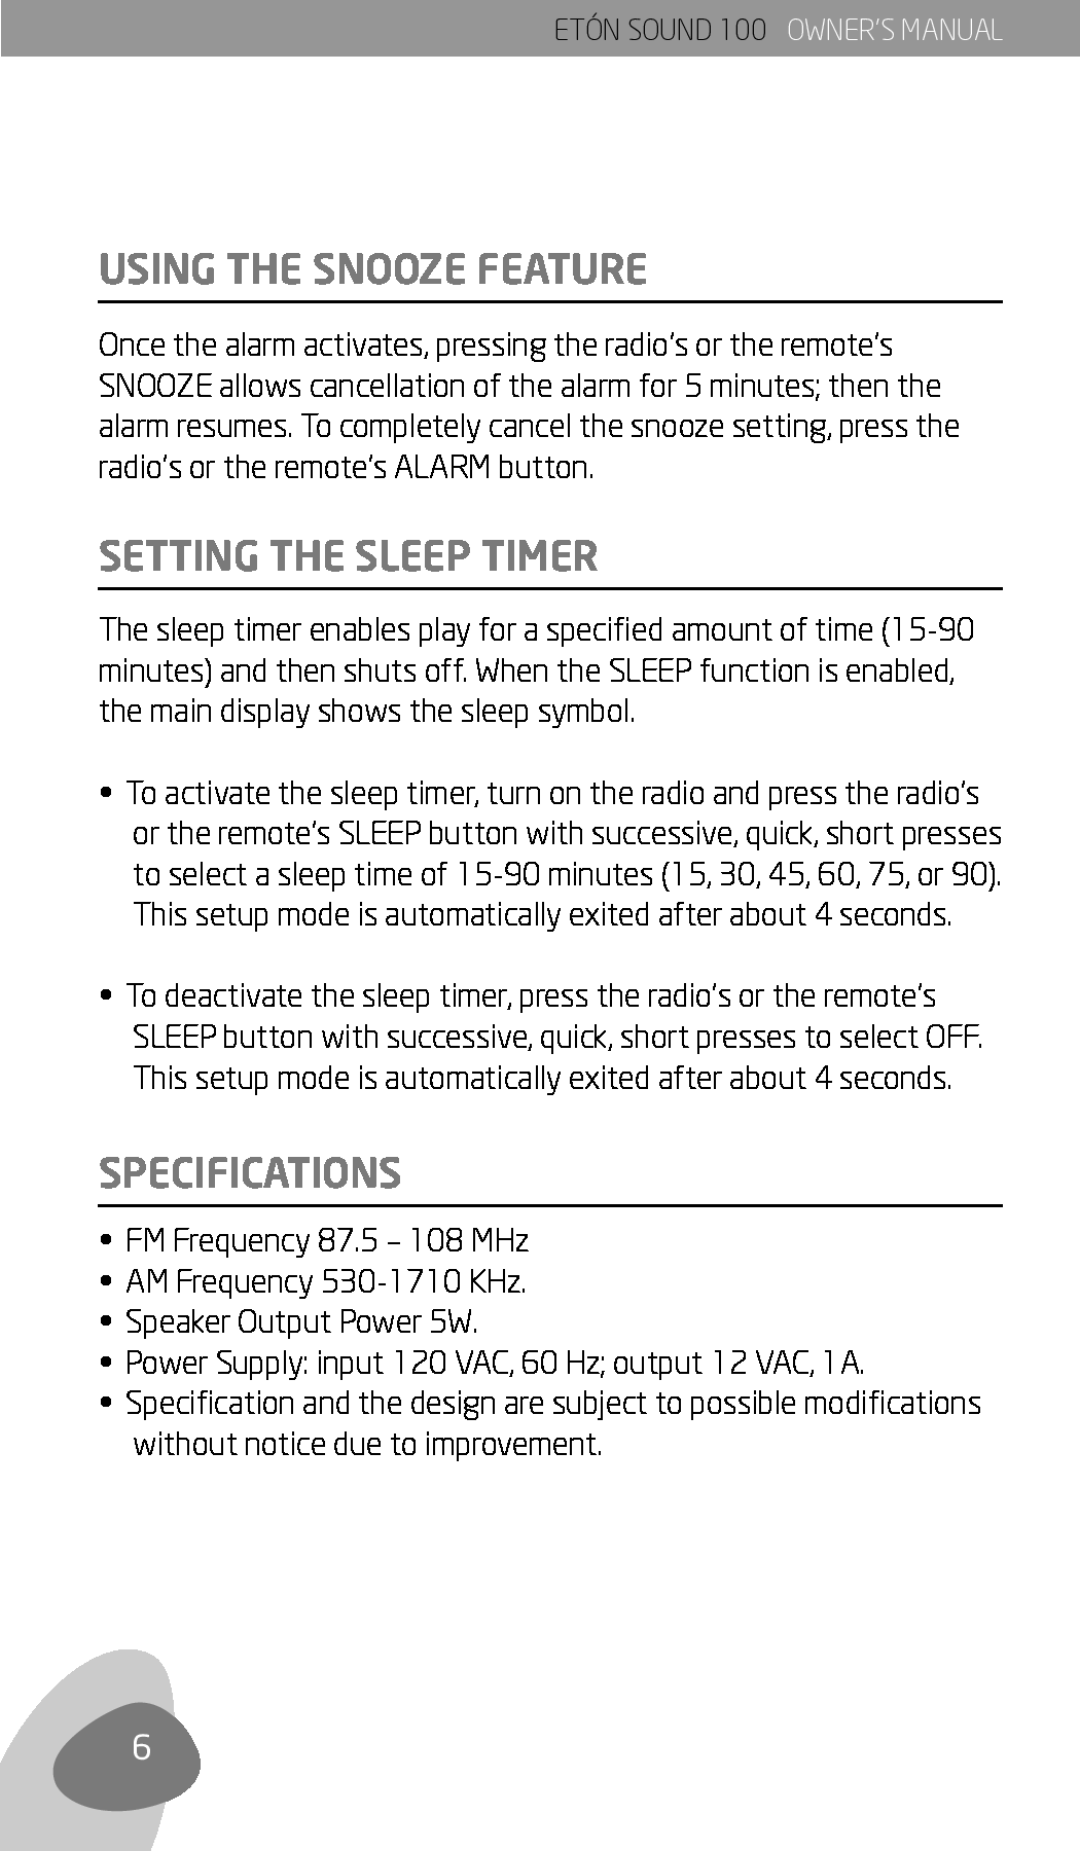 Eton Sound 100 owner manual Using The Snooze Feature, Setting The Sleep Timer, Specifications, FM Frequency 87.5 - 108 MHz 